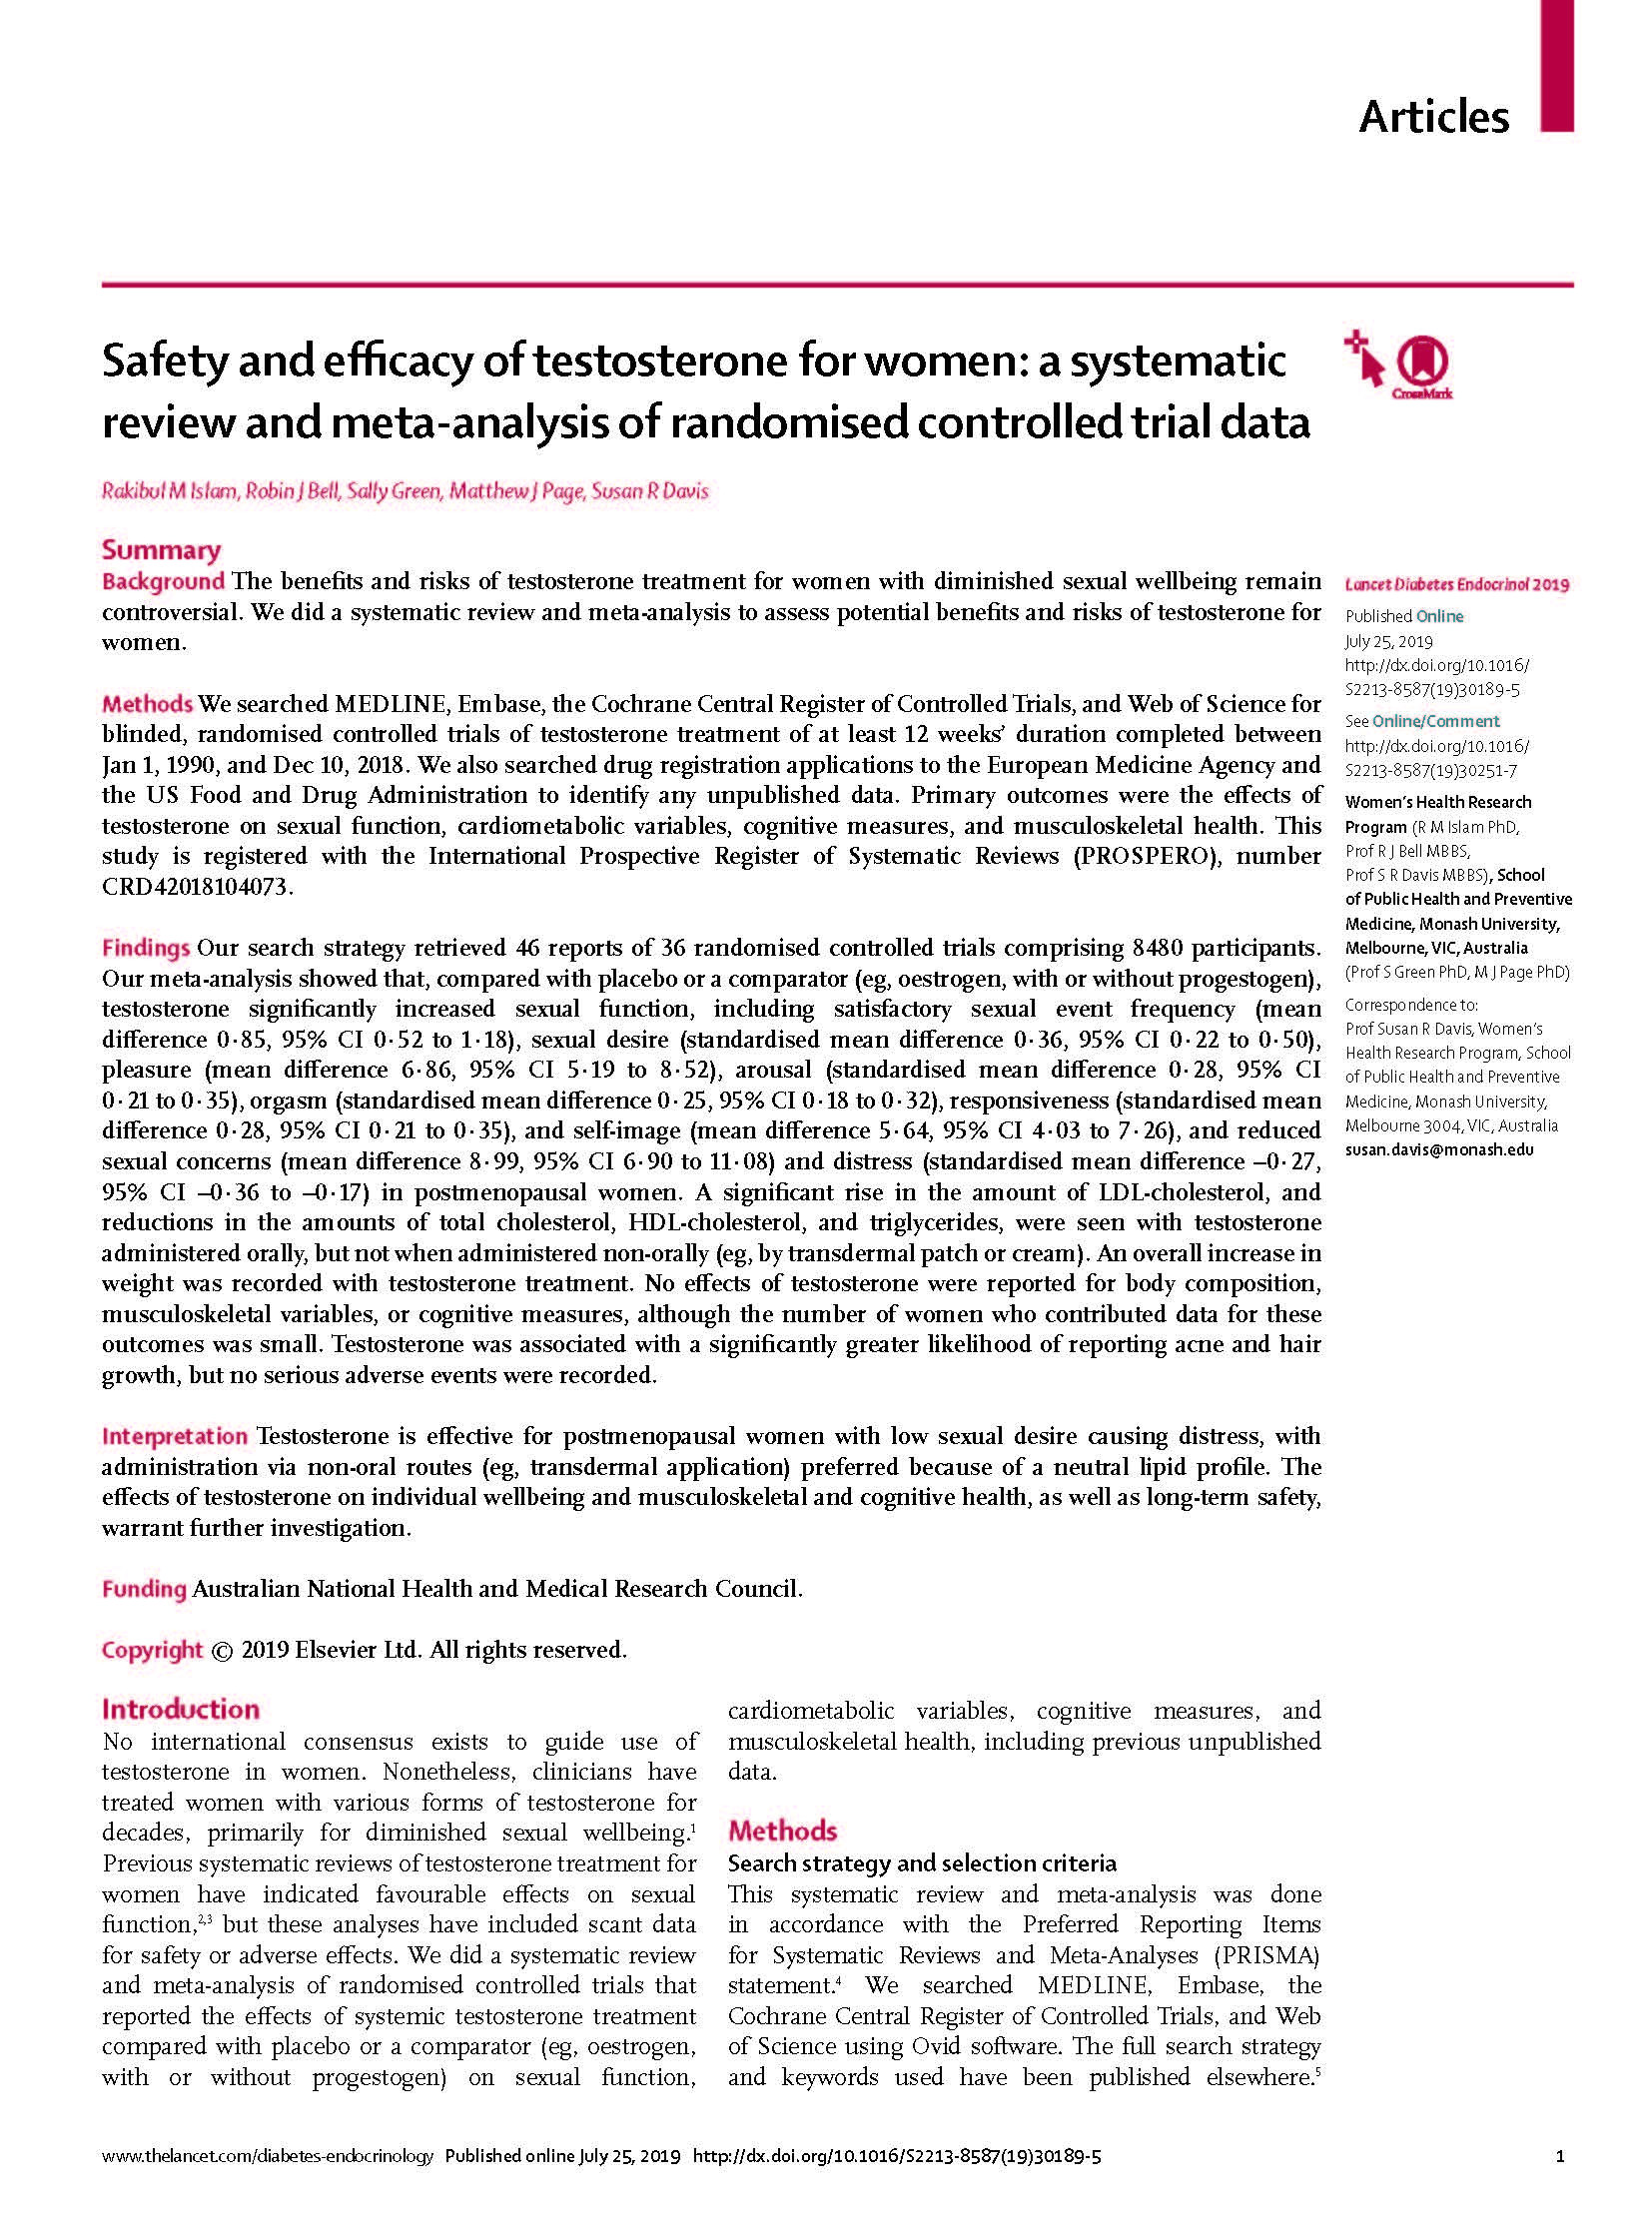 Safety and efficacy of testosterone for women: a systematic review and meta-analysis of randomised controlled trial data